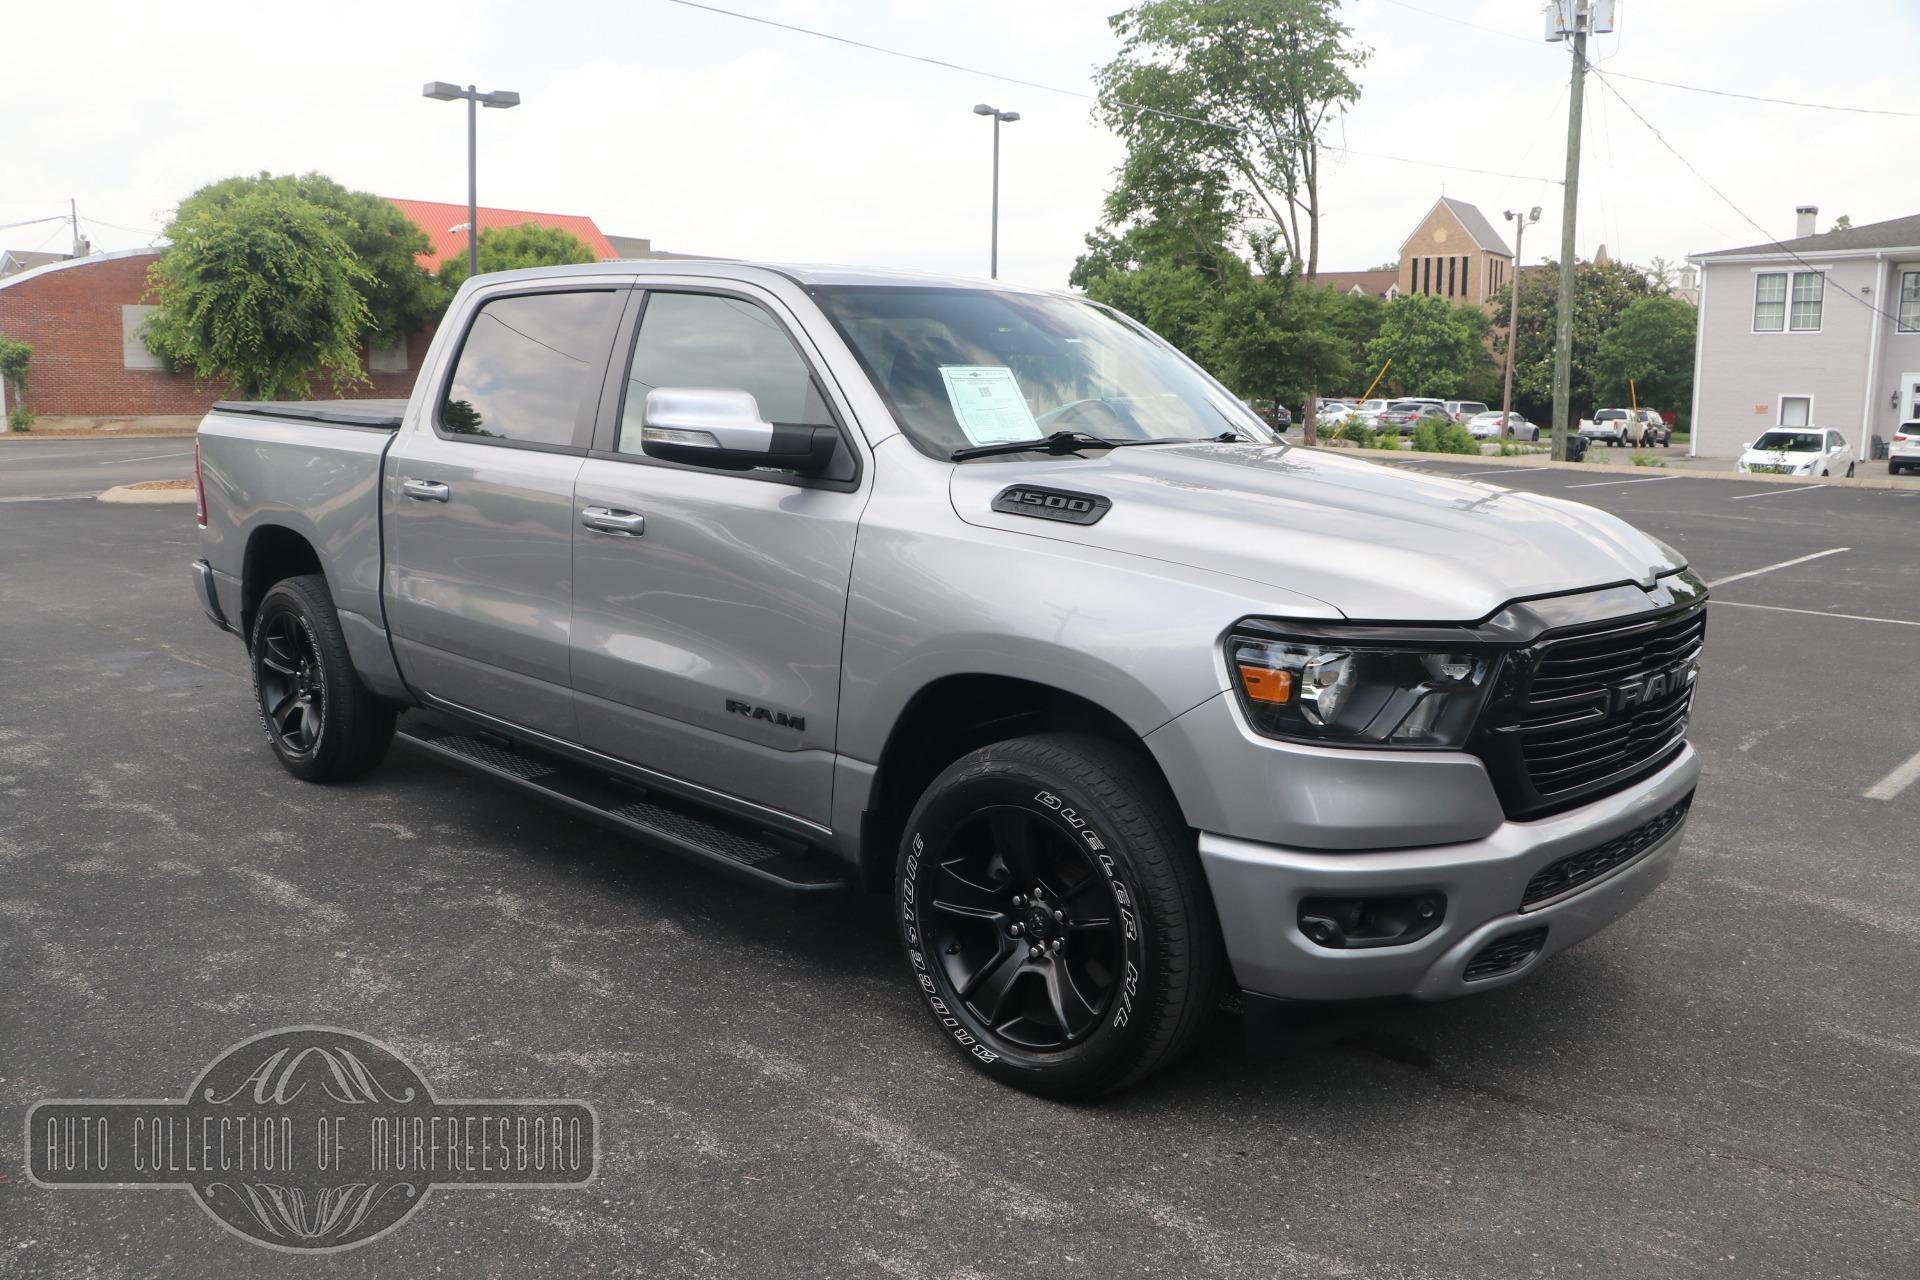 Used Ram 1500 Big Horn Crew Cab Night Edition 5 7l V8 W Nav For Sale 45 950 Auto Collection Stock